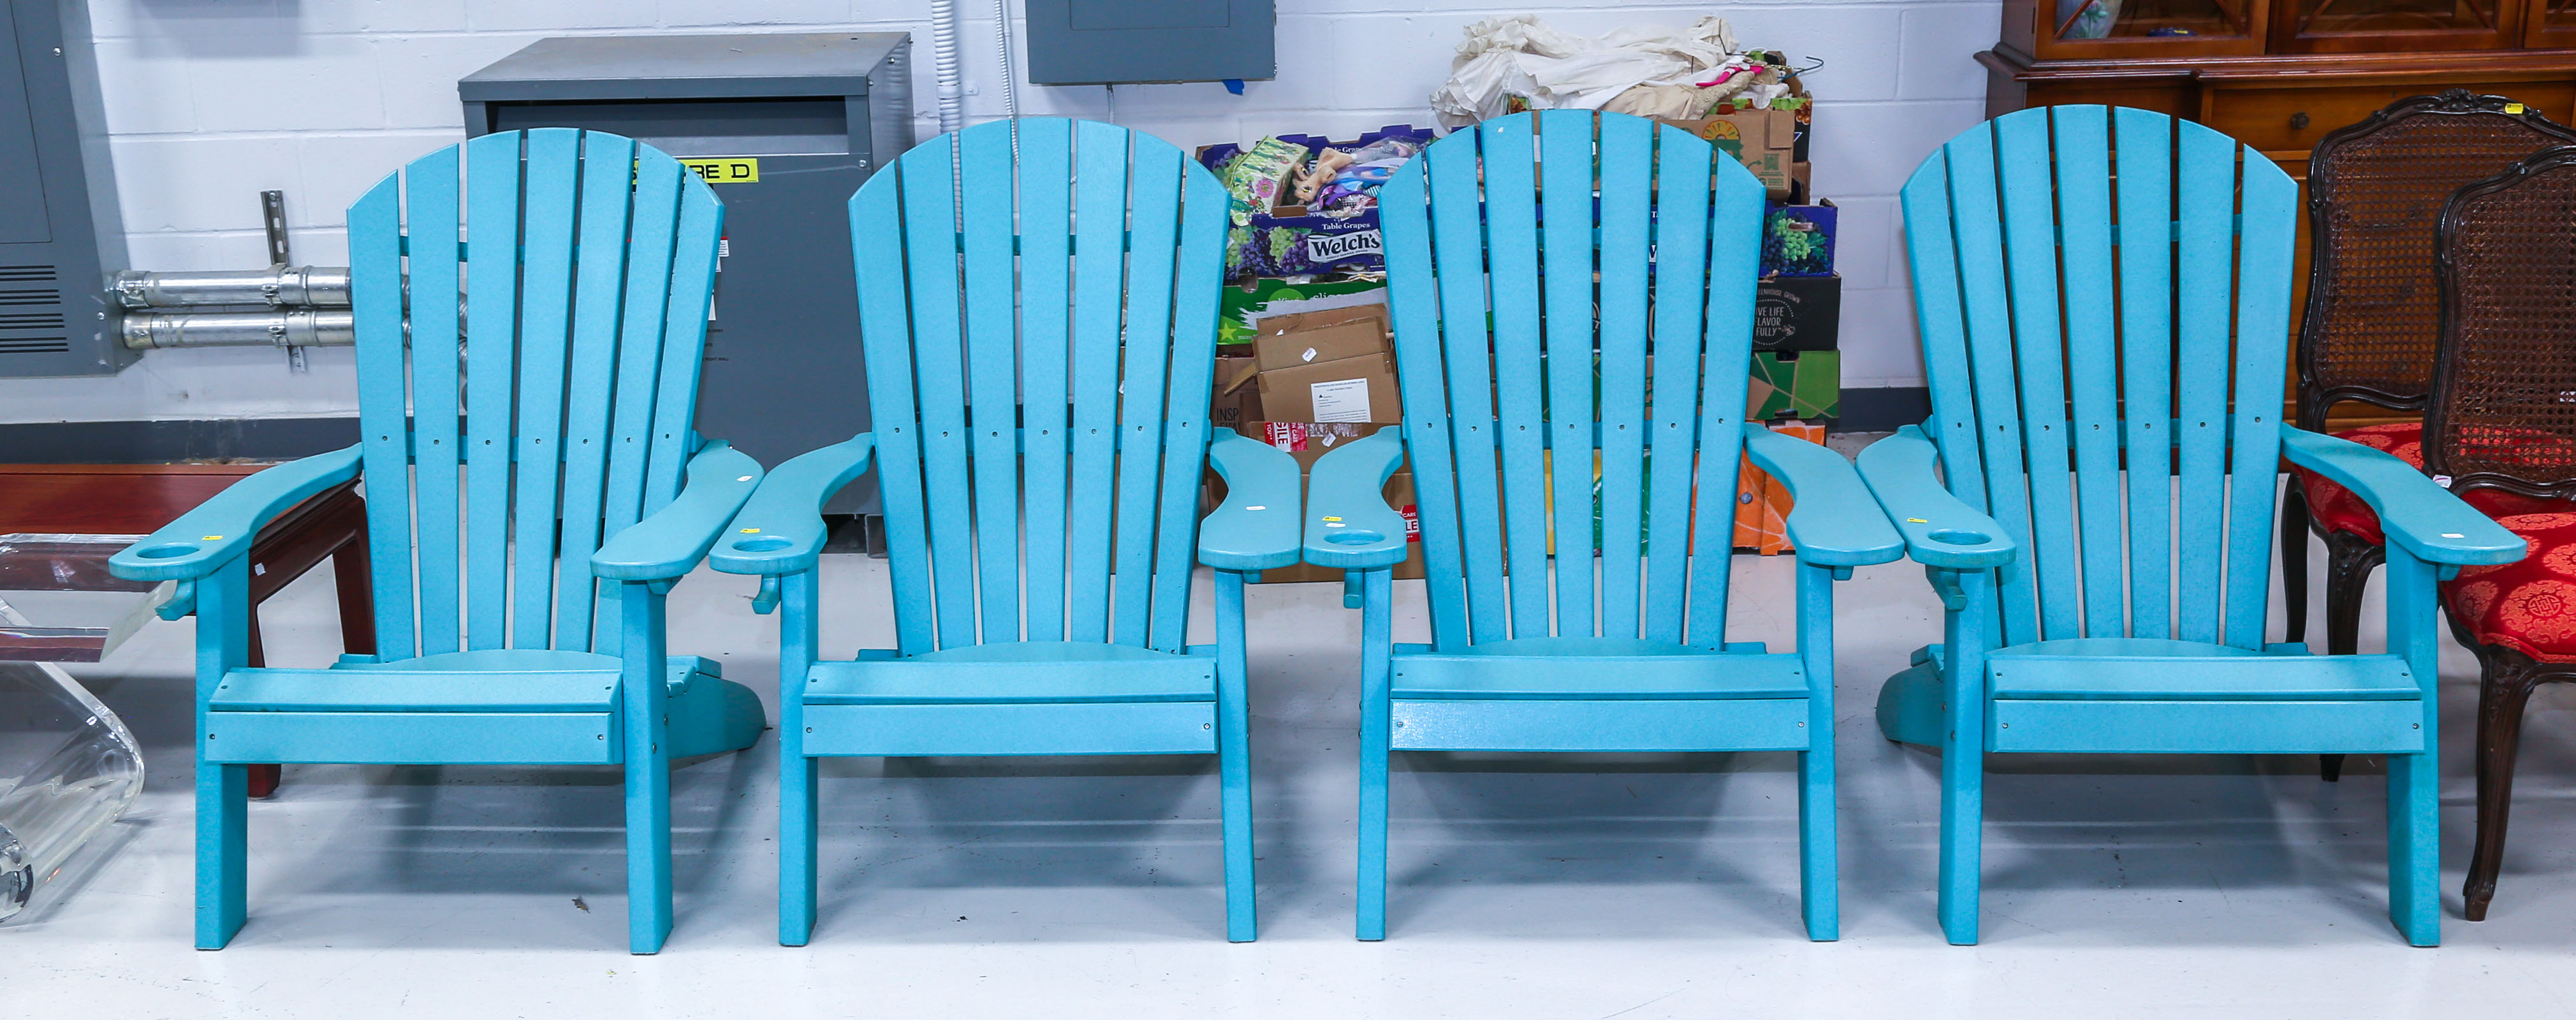 SET OF FOUR ADIRONDACK STYLE LAWN CHAIRS